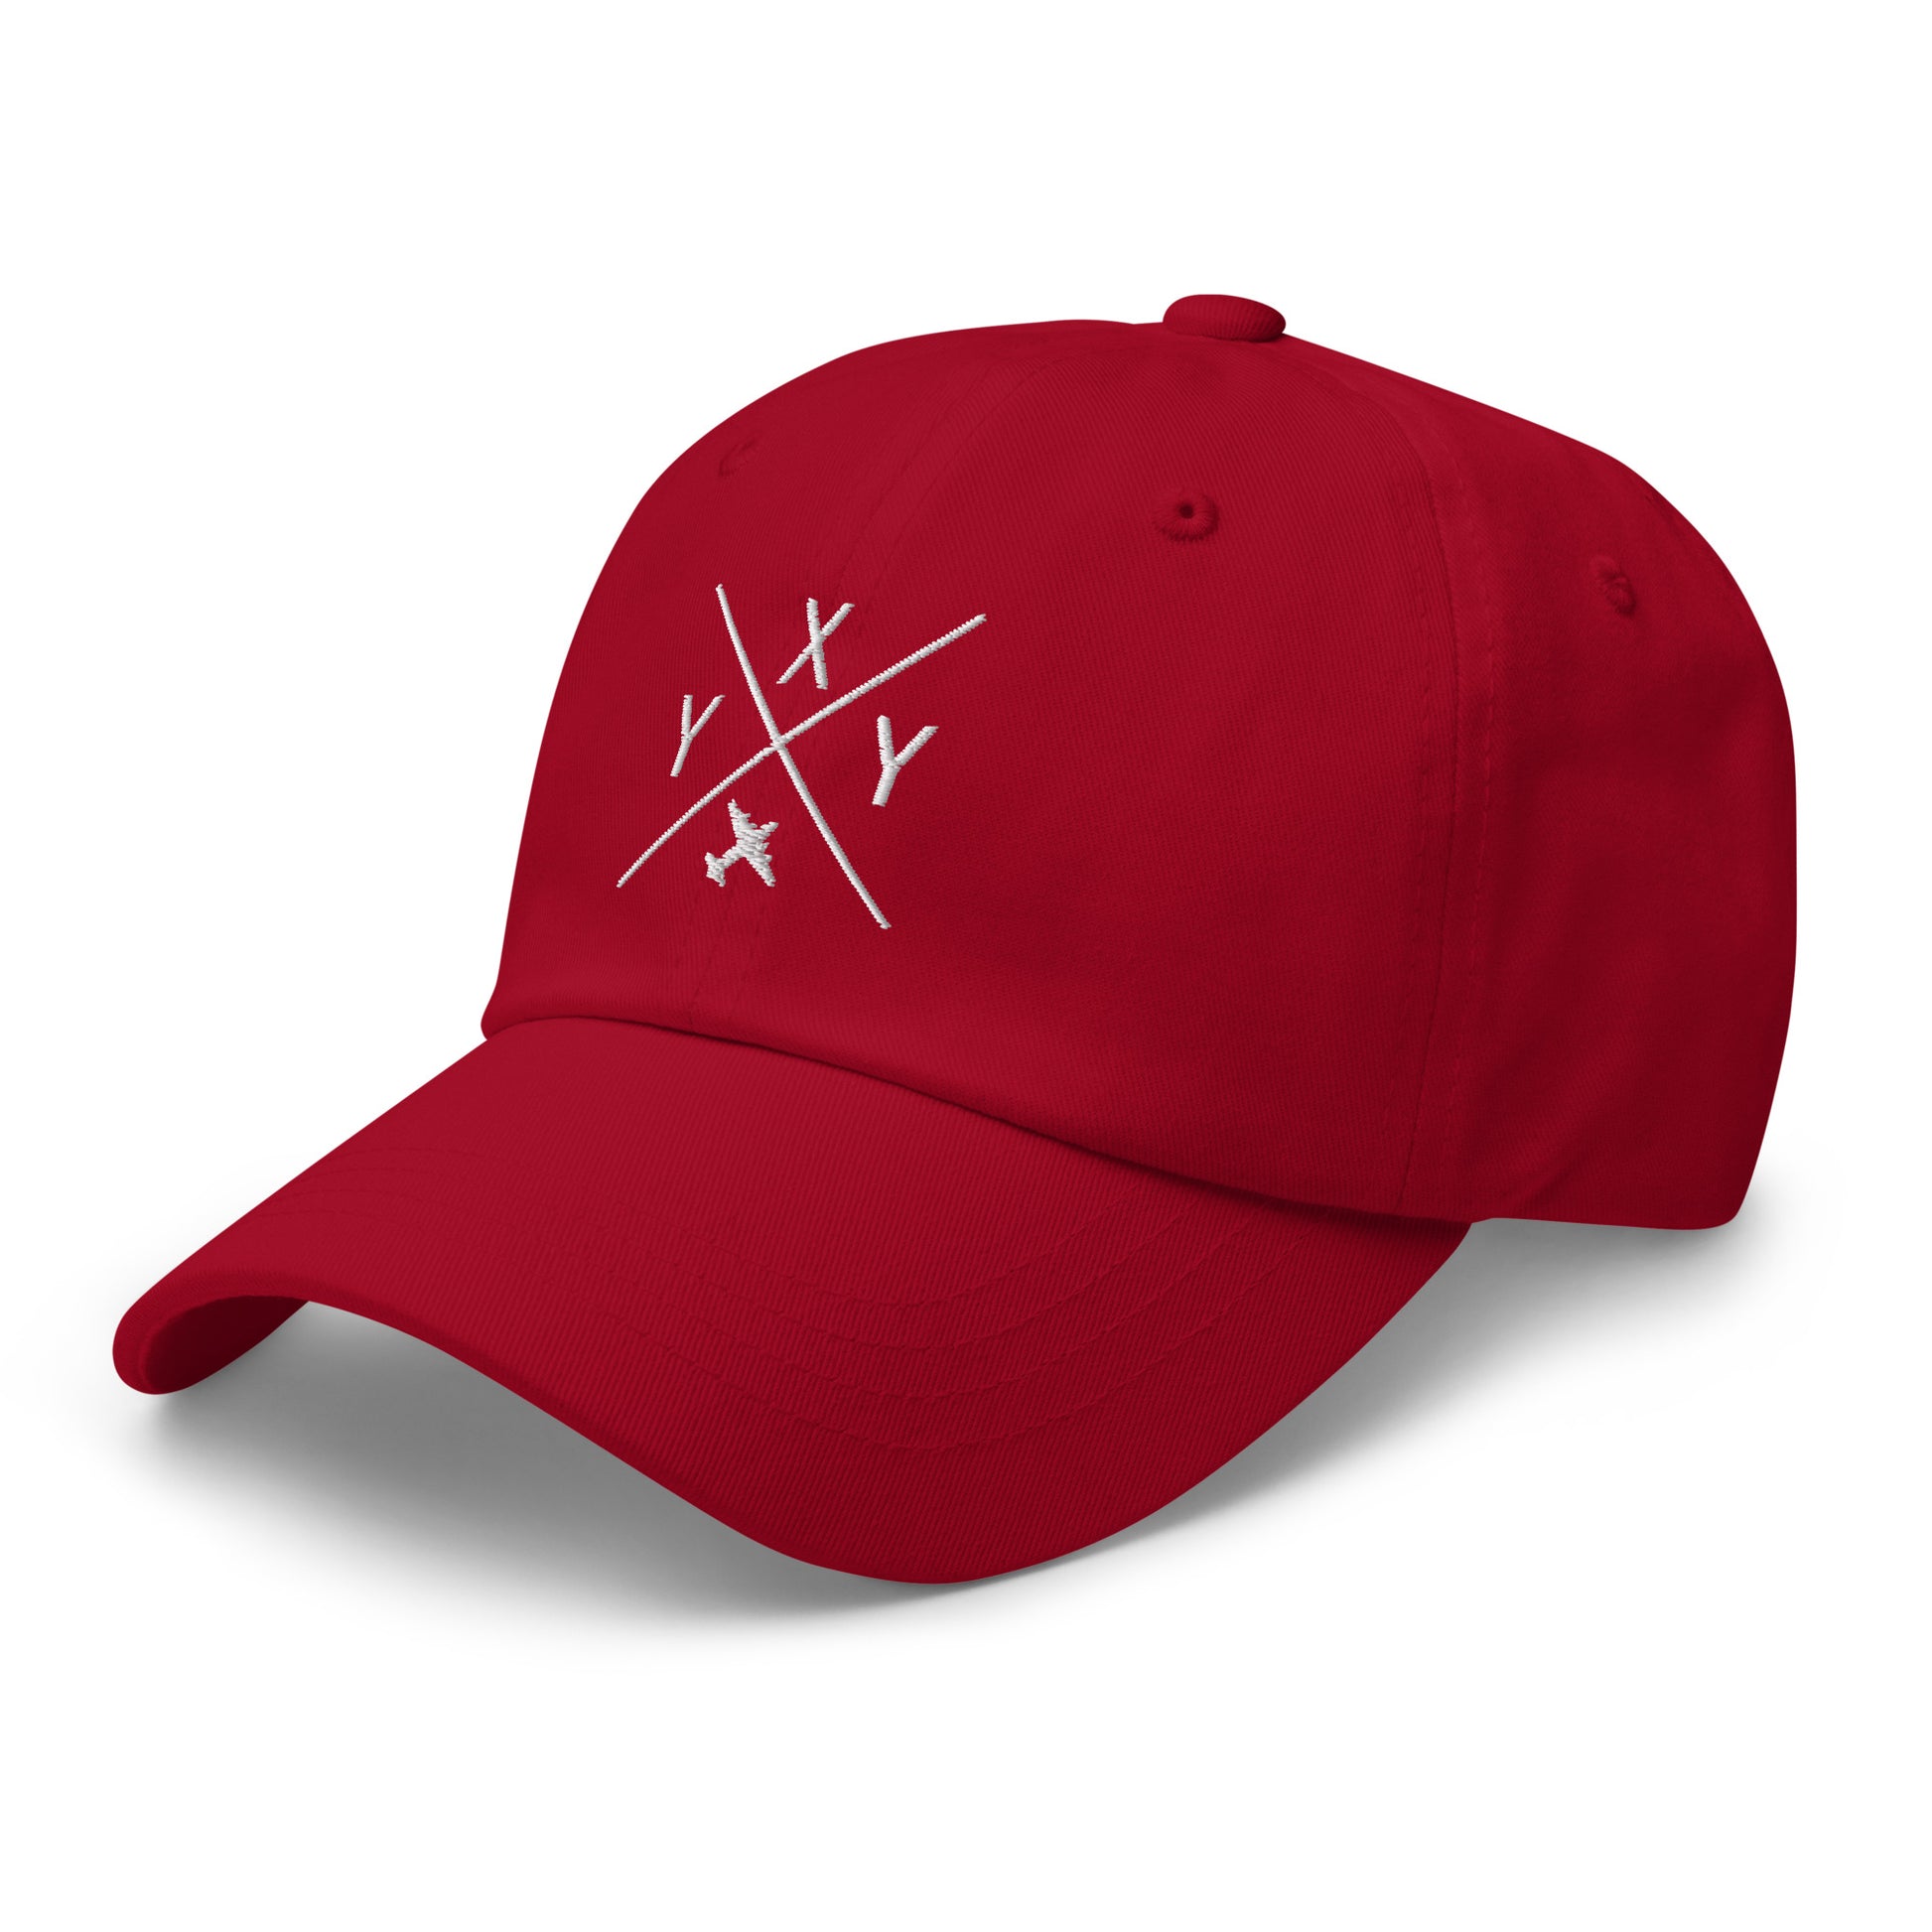 Crossed-X Dad Hat - White • YXY Whitehorse • YHM Designs - Image 01